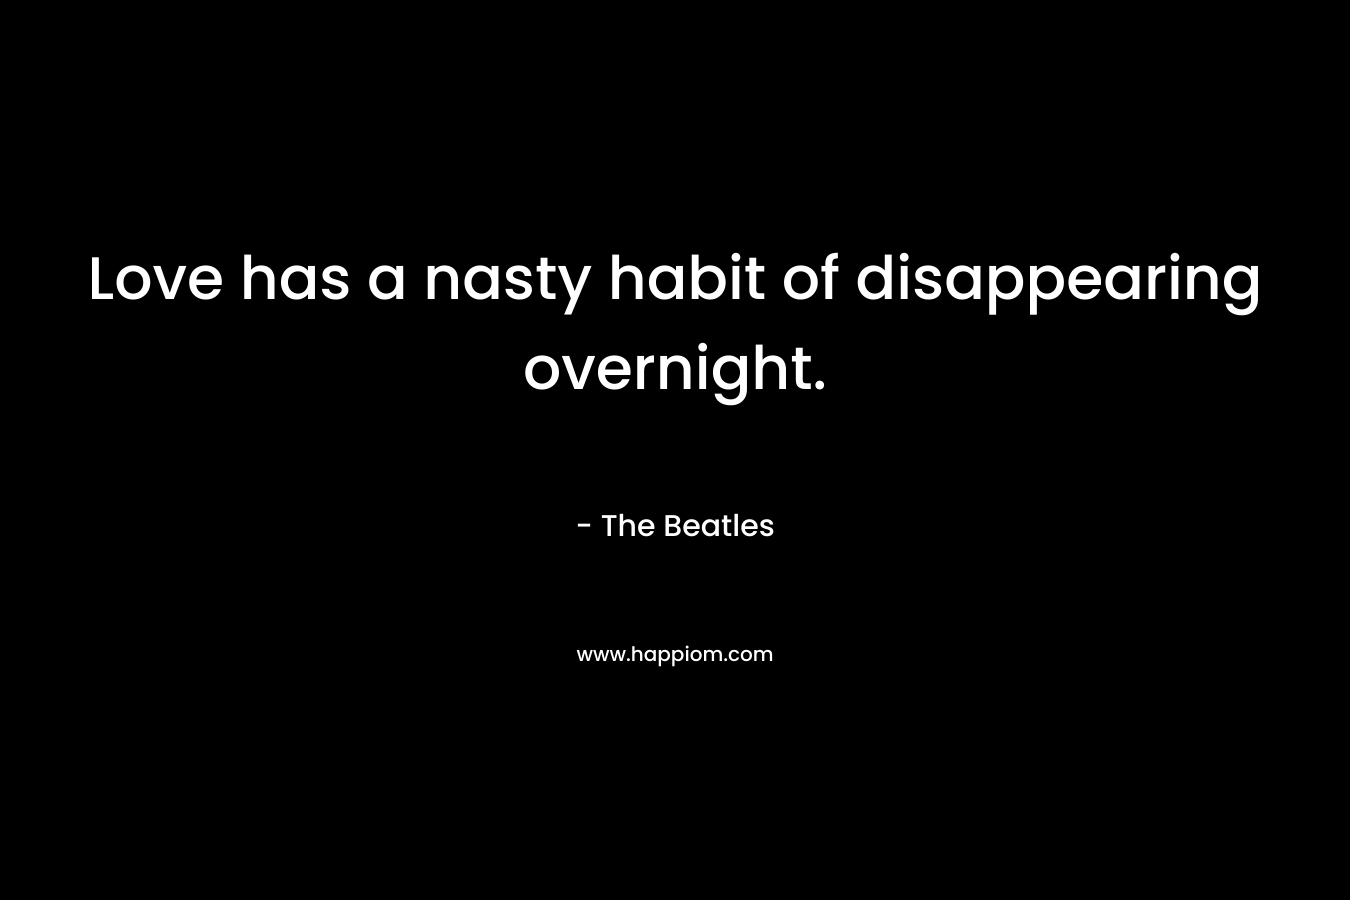 Love has a nasty habit of disappearing overnight. – The Beatles